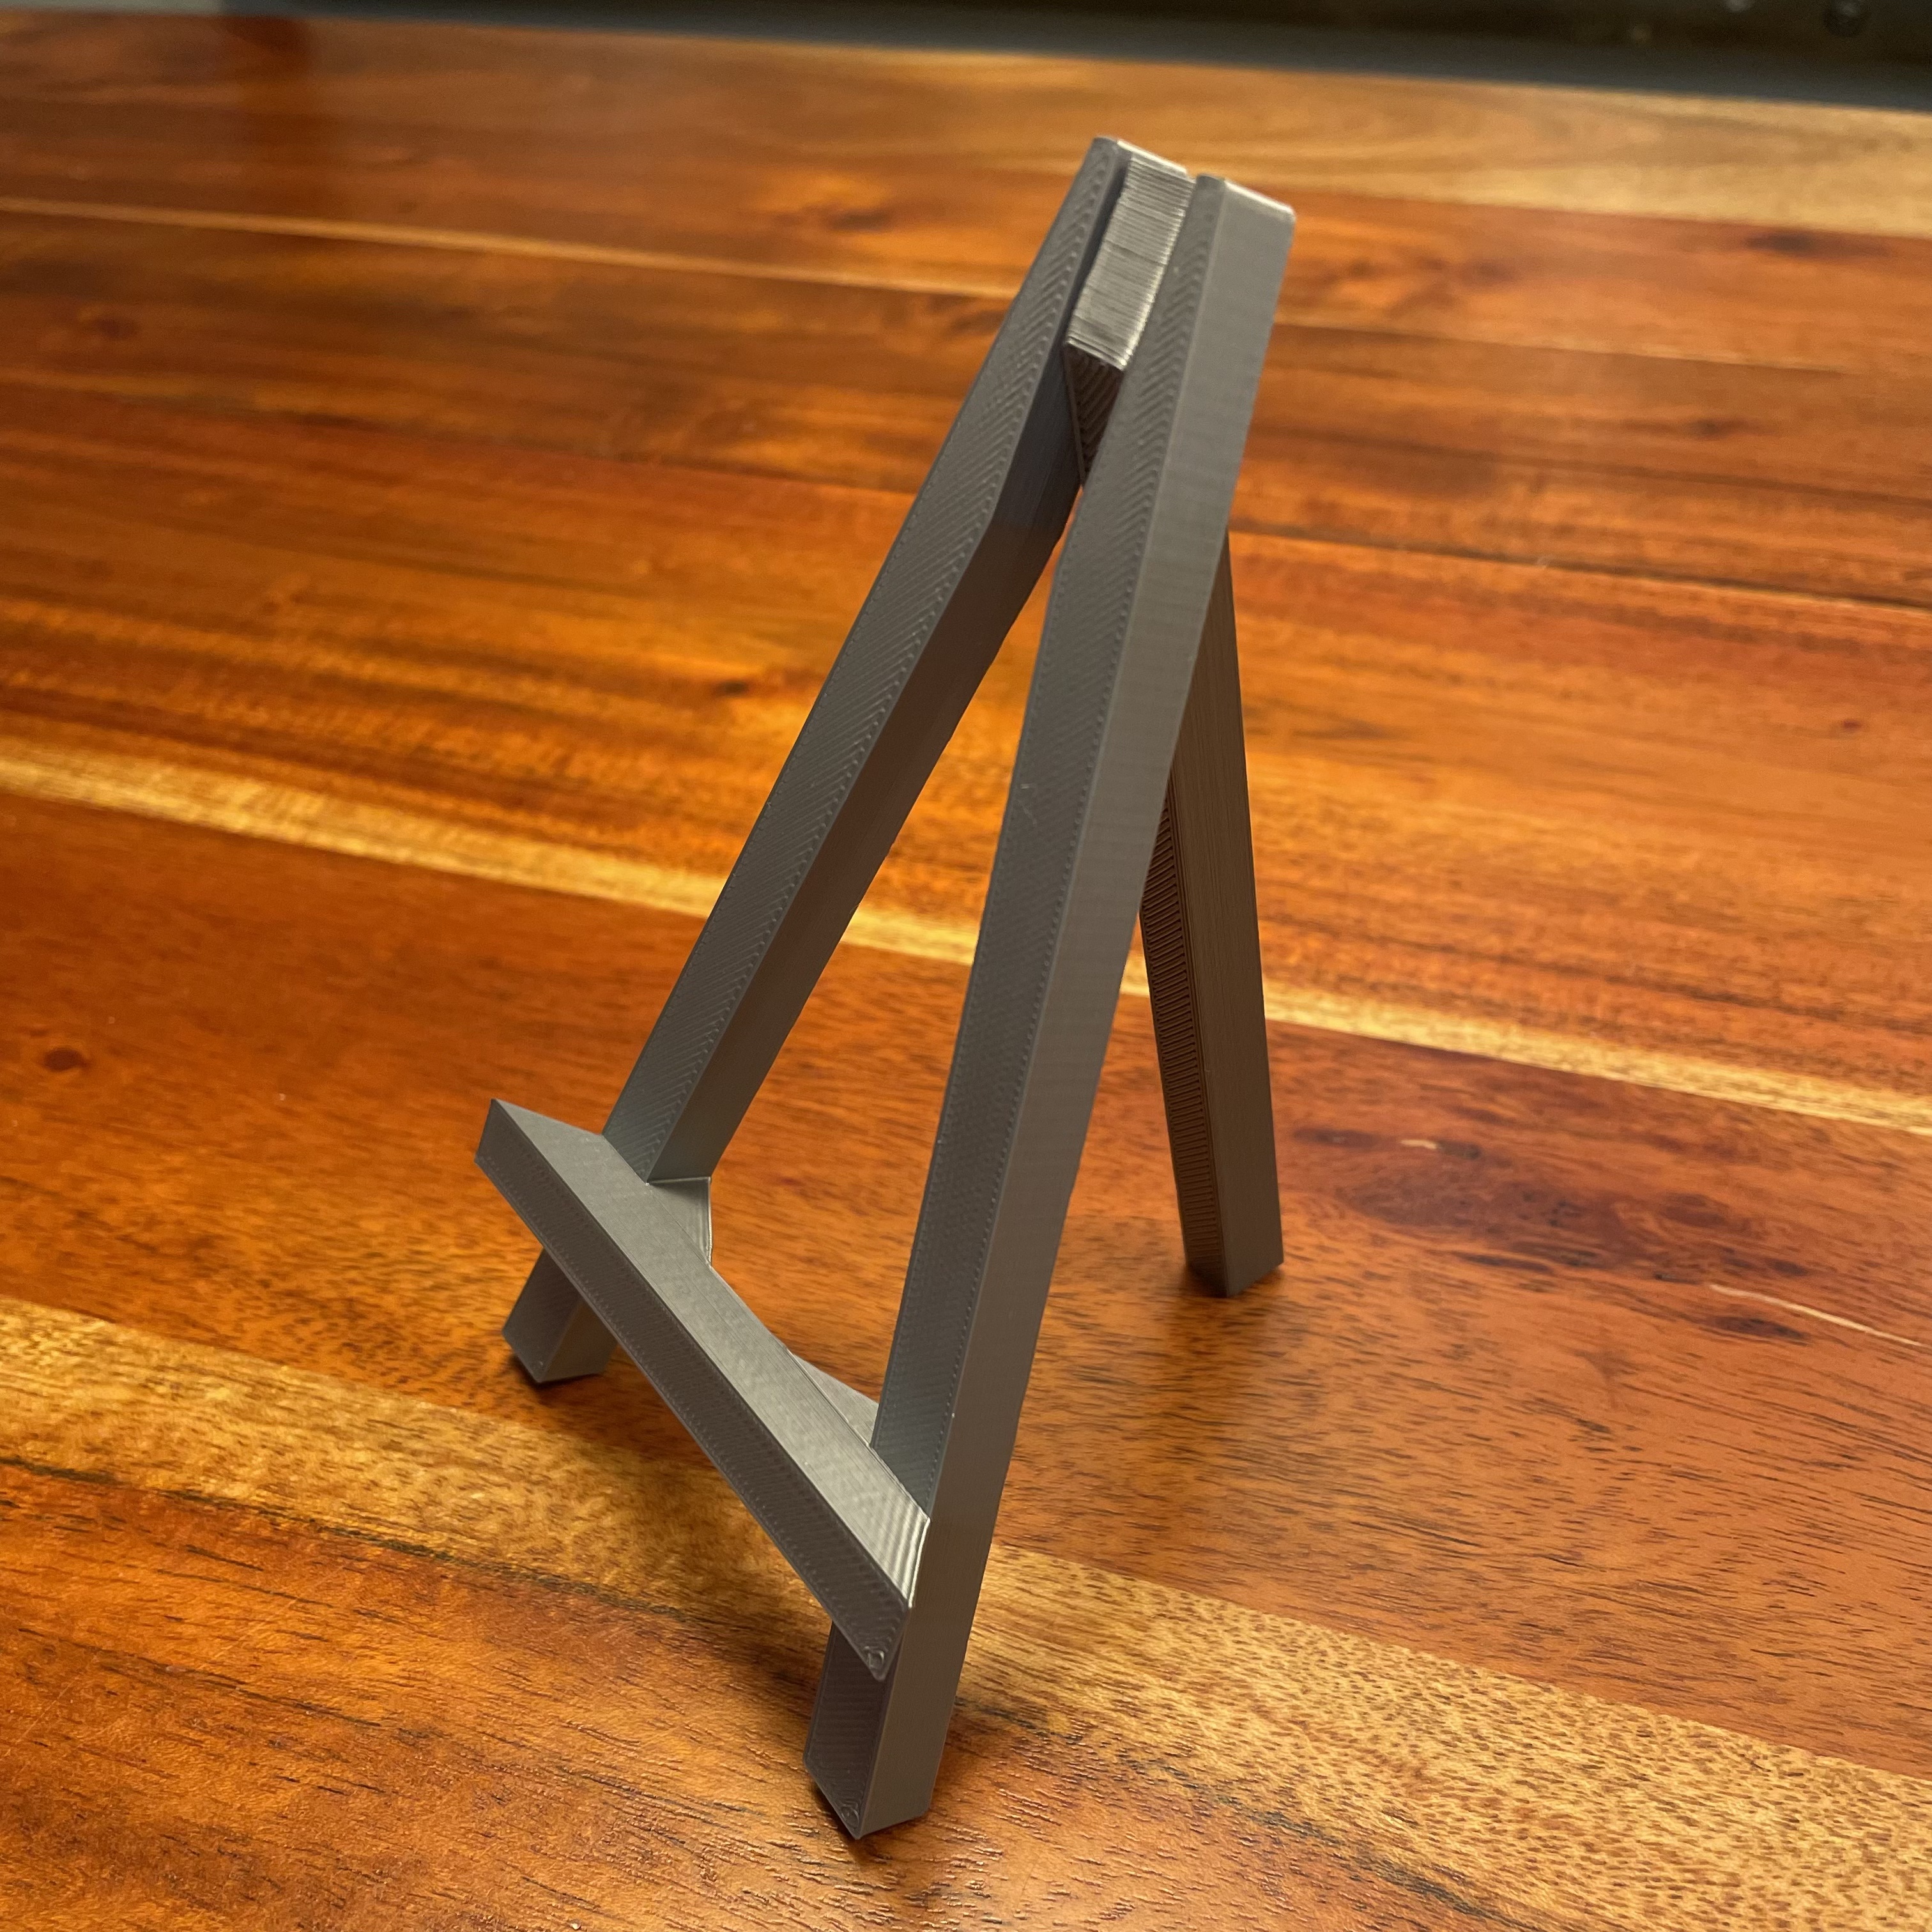 Print-in-Place Mini Easel